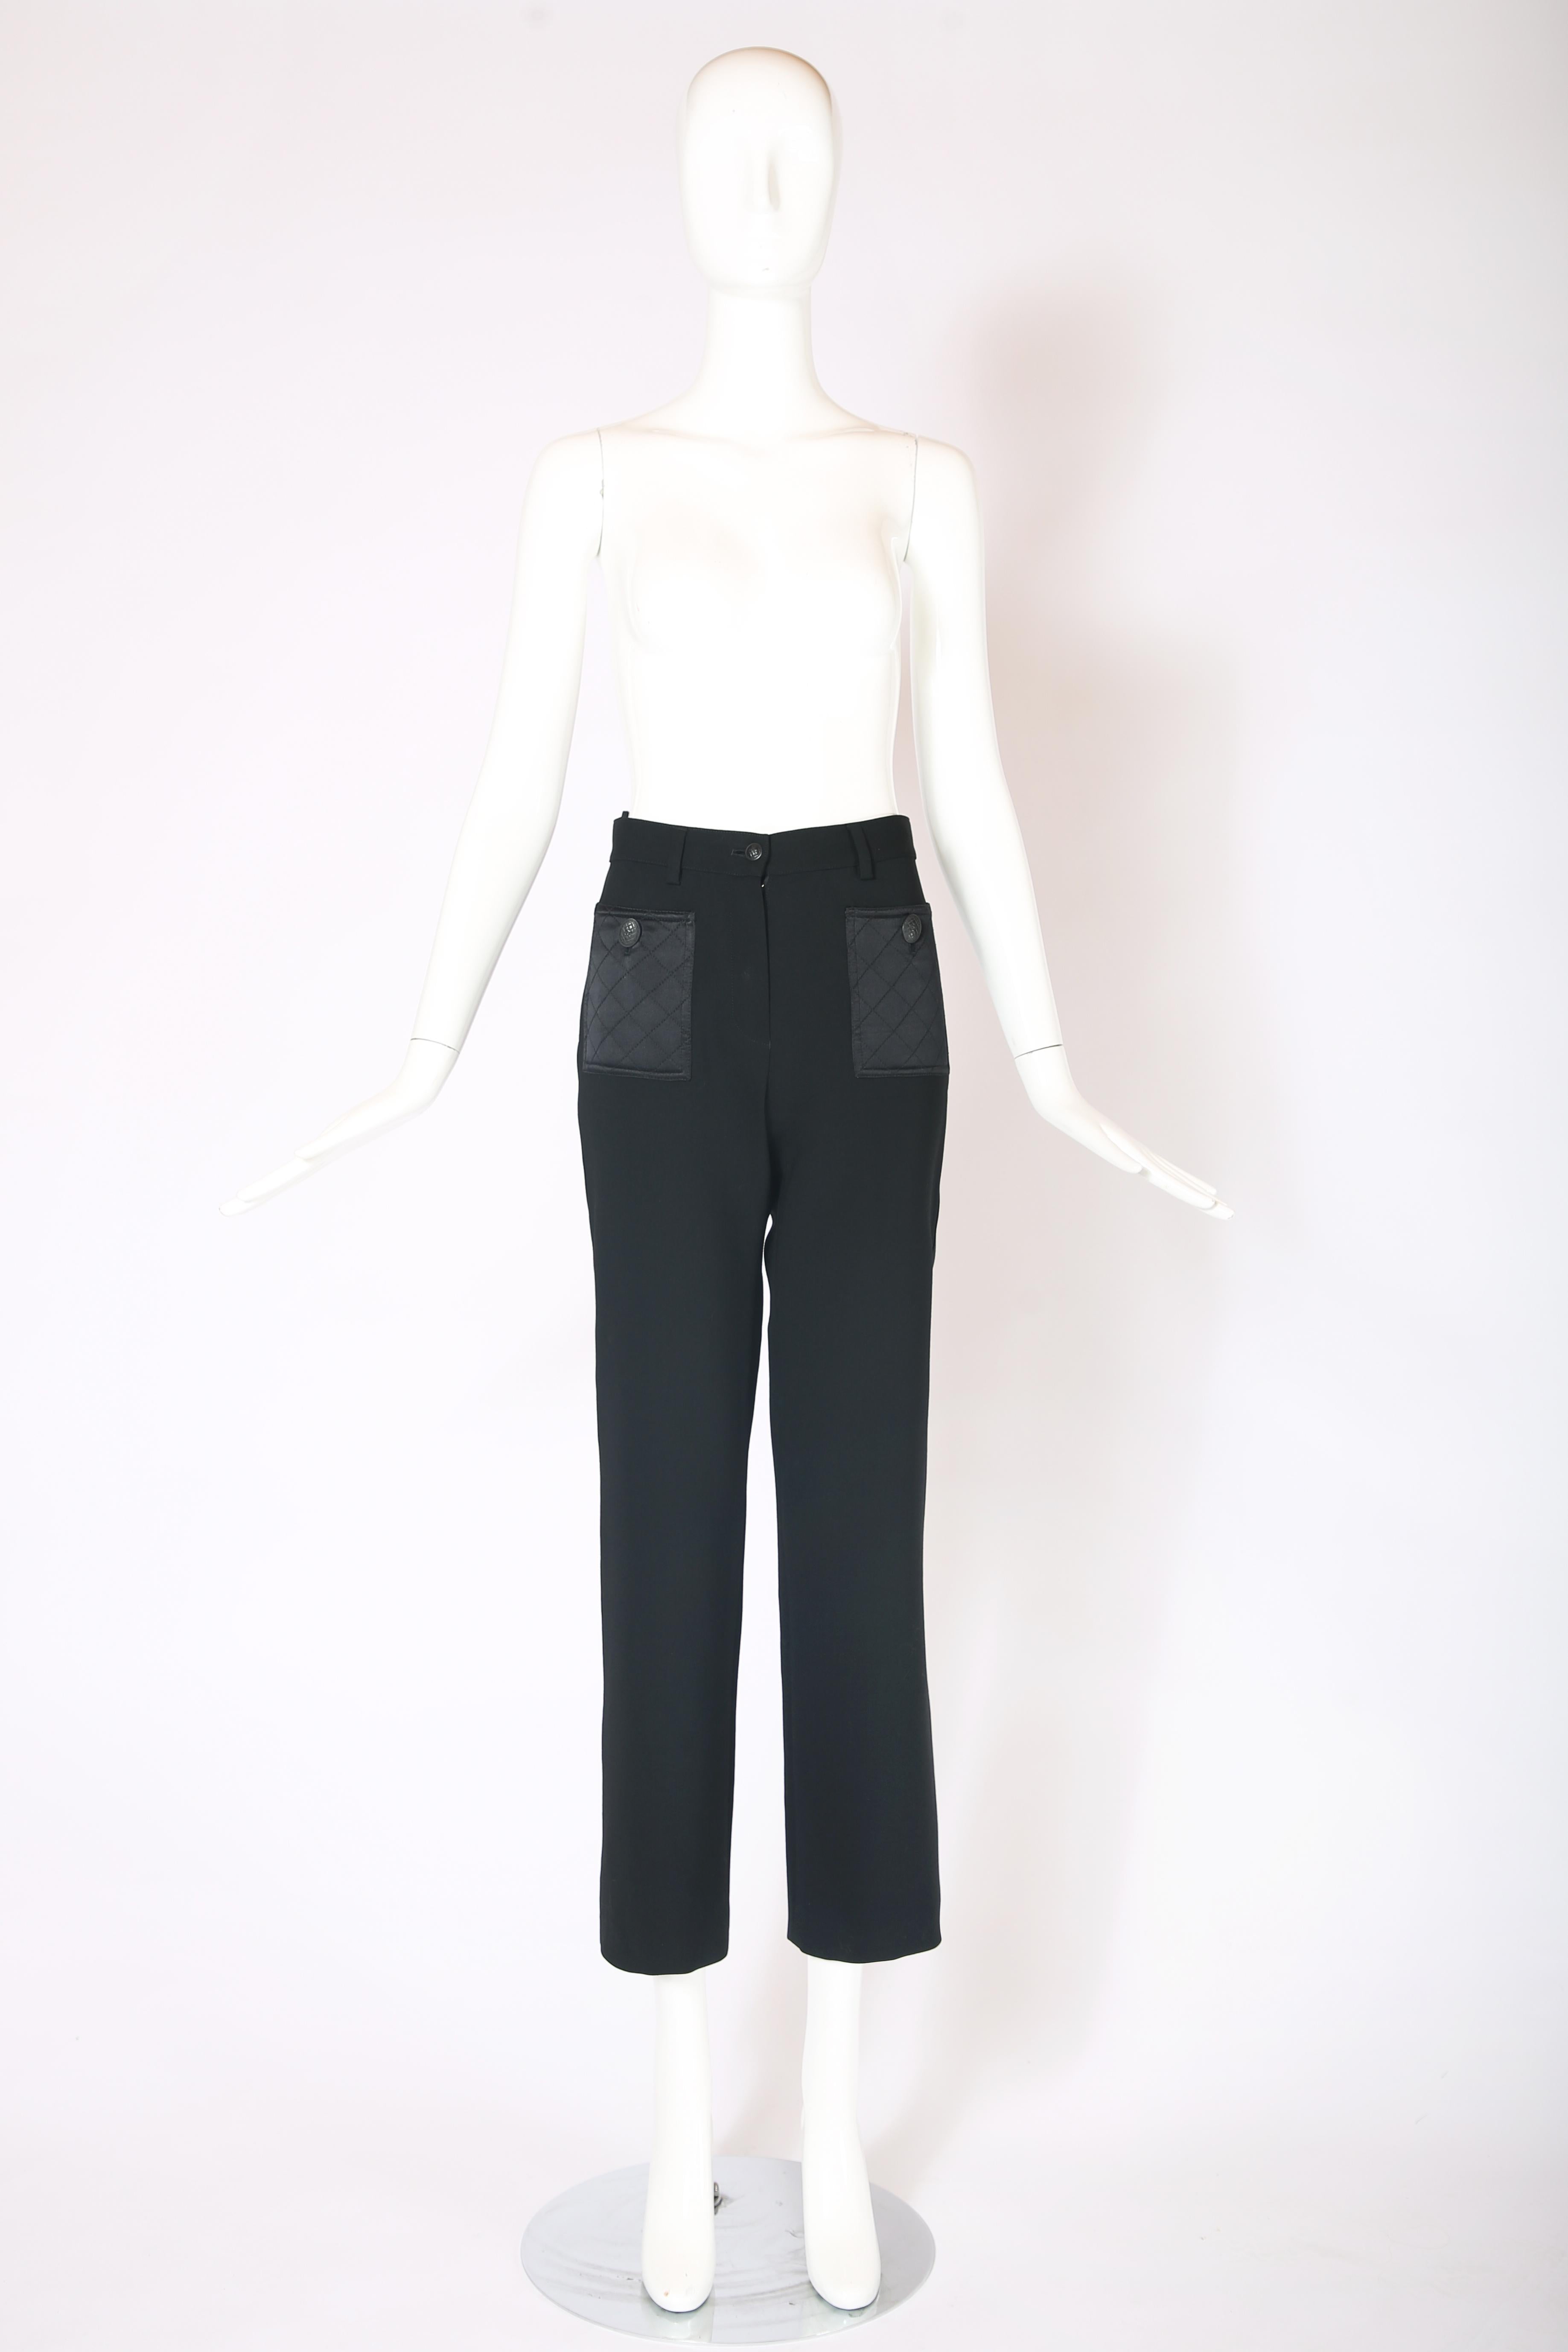 2004 A/H Chanel Black Wool Stretch Pants w/Quilted Satin Hip Pockets In Excellent Condition For Sale In Studio City, CA